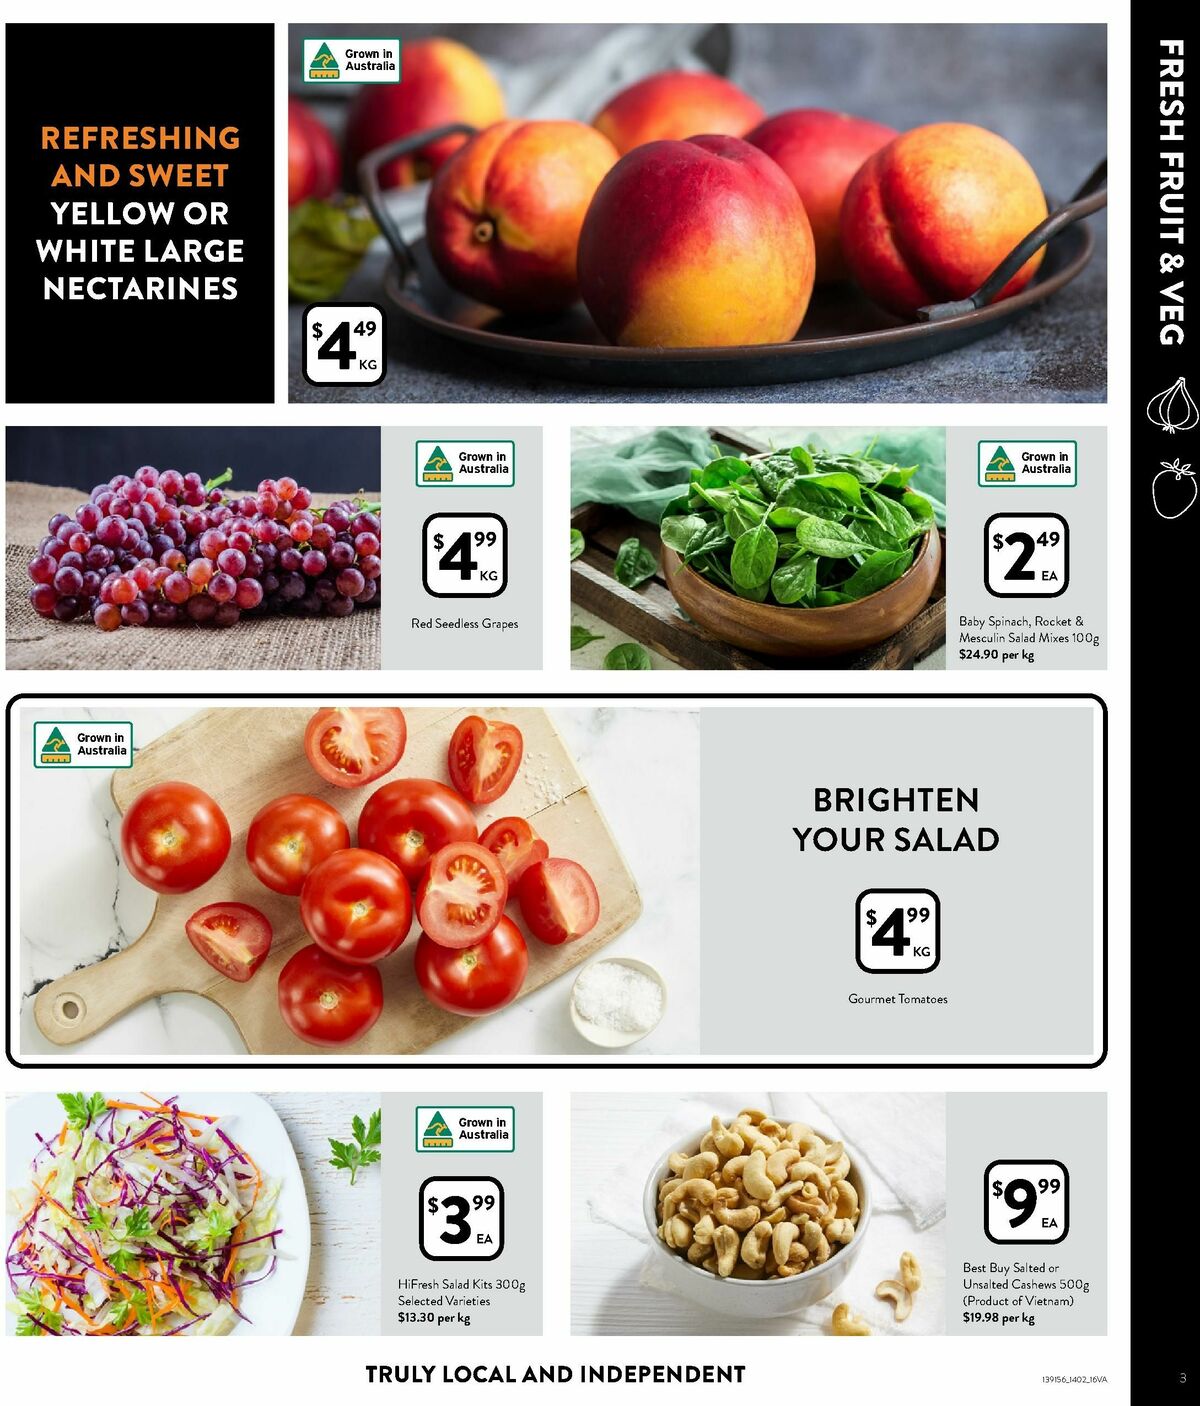 FoodWorks Supermarket Catalogues from 14 February